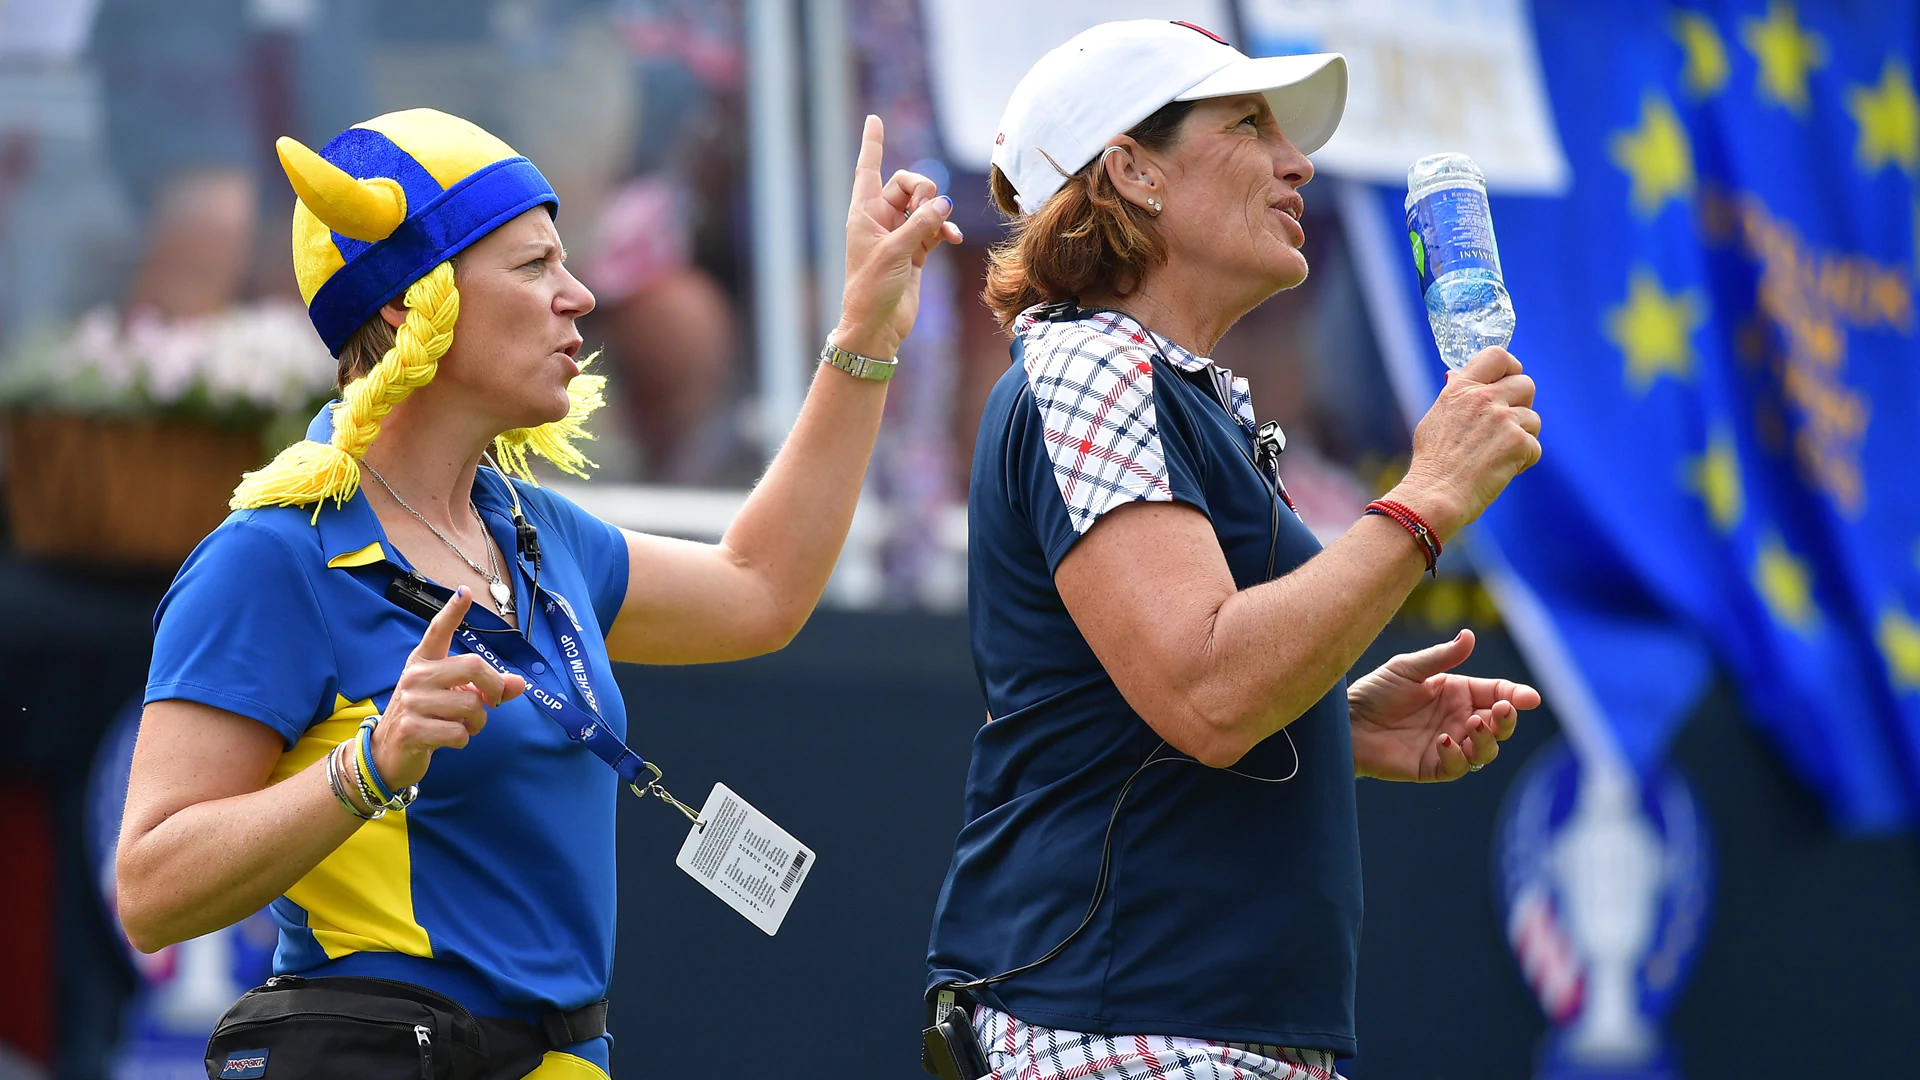 Watch: Inkster AND Annika dance on first tee